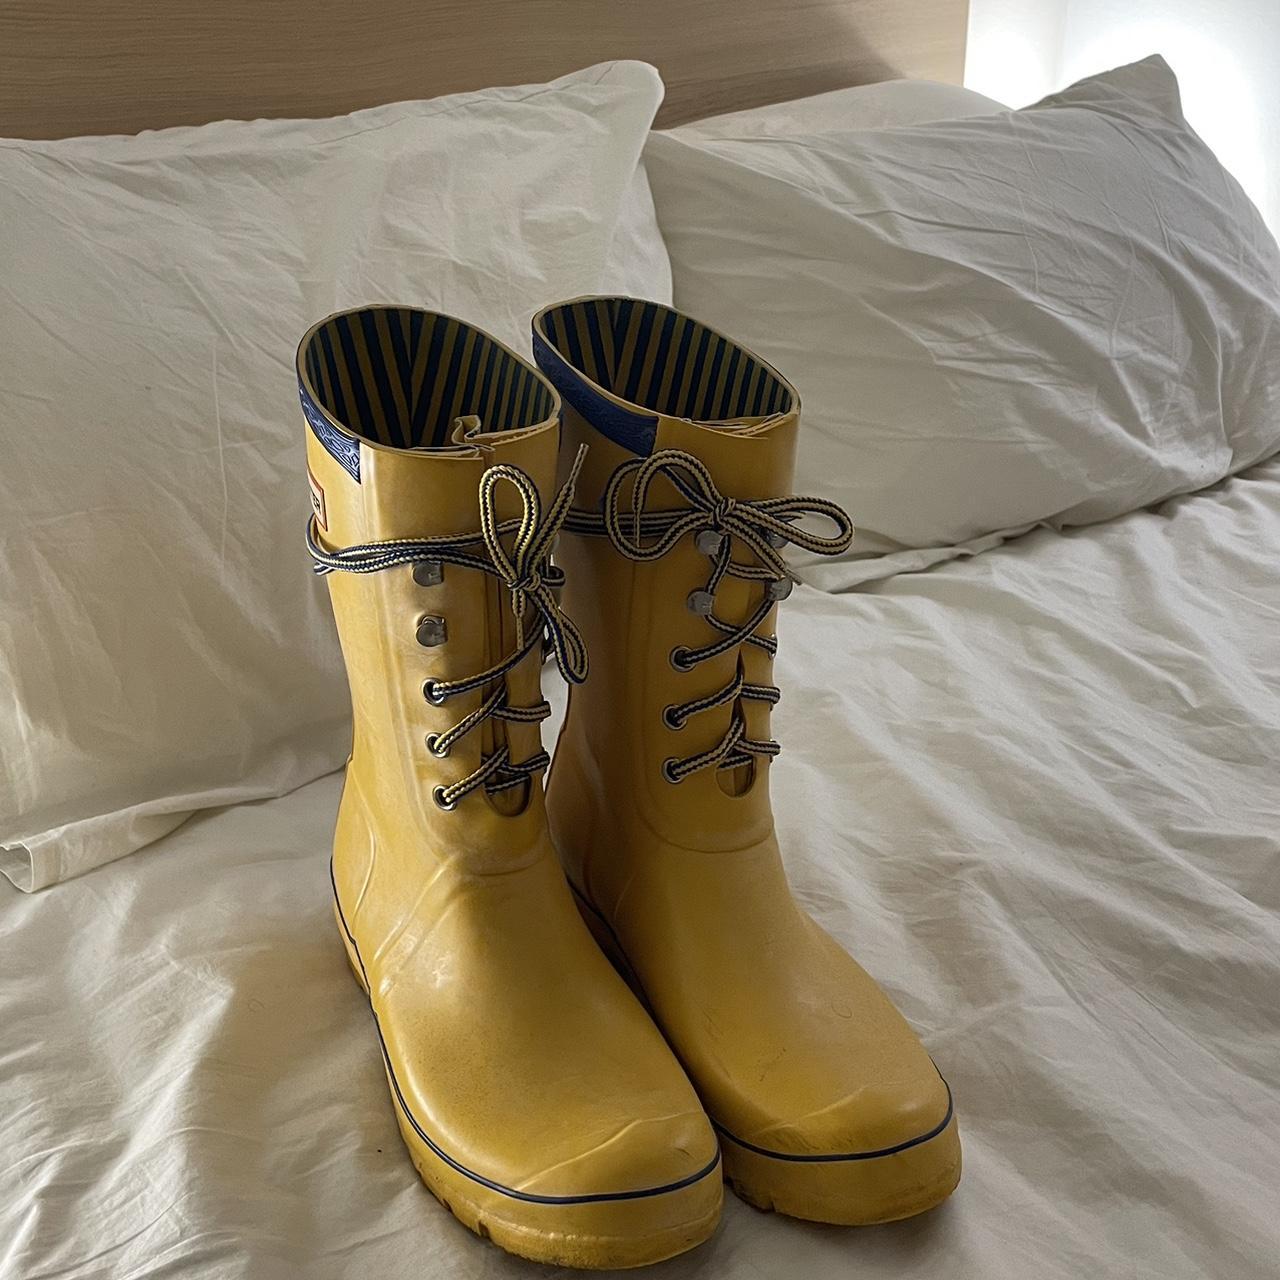 Hunter Women's Yellow and Blue Boots